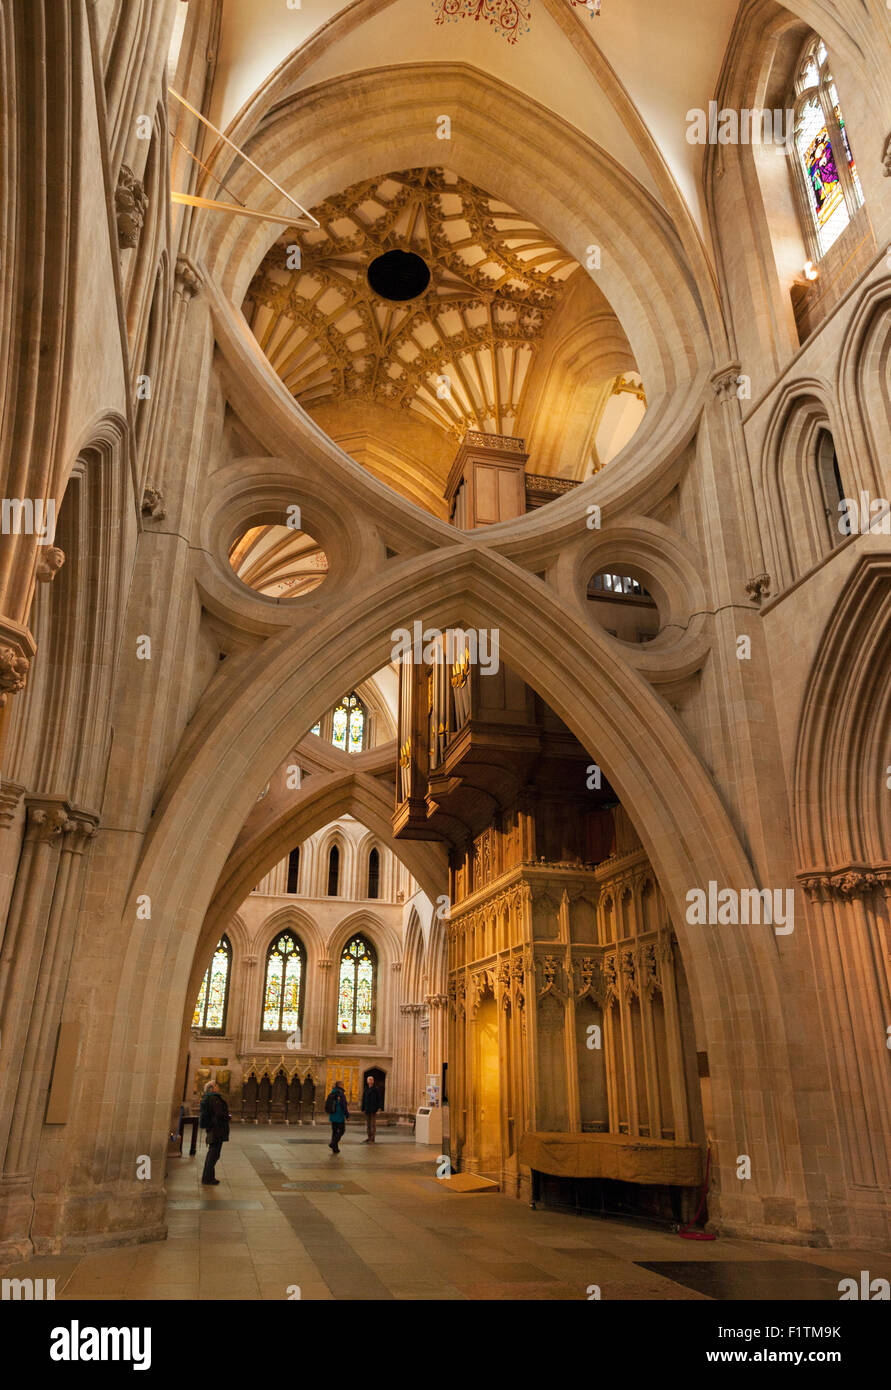 The 'Scissor Arches' - an example of 12th century medieval architecture; the interior of Wells cathedral, Somerset, England UK Stock Photo